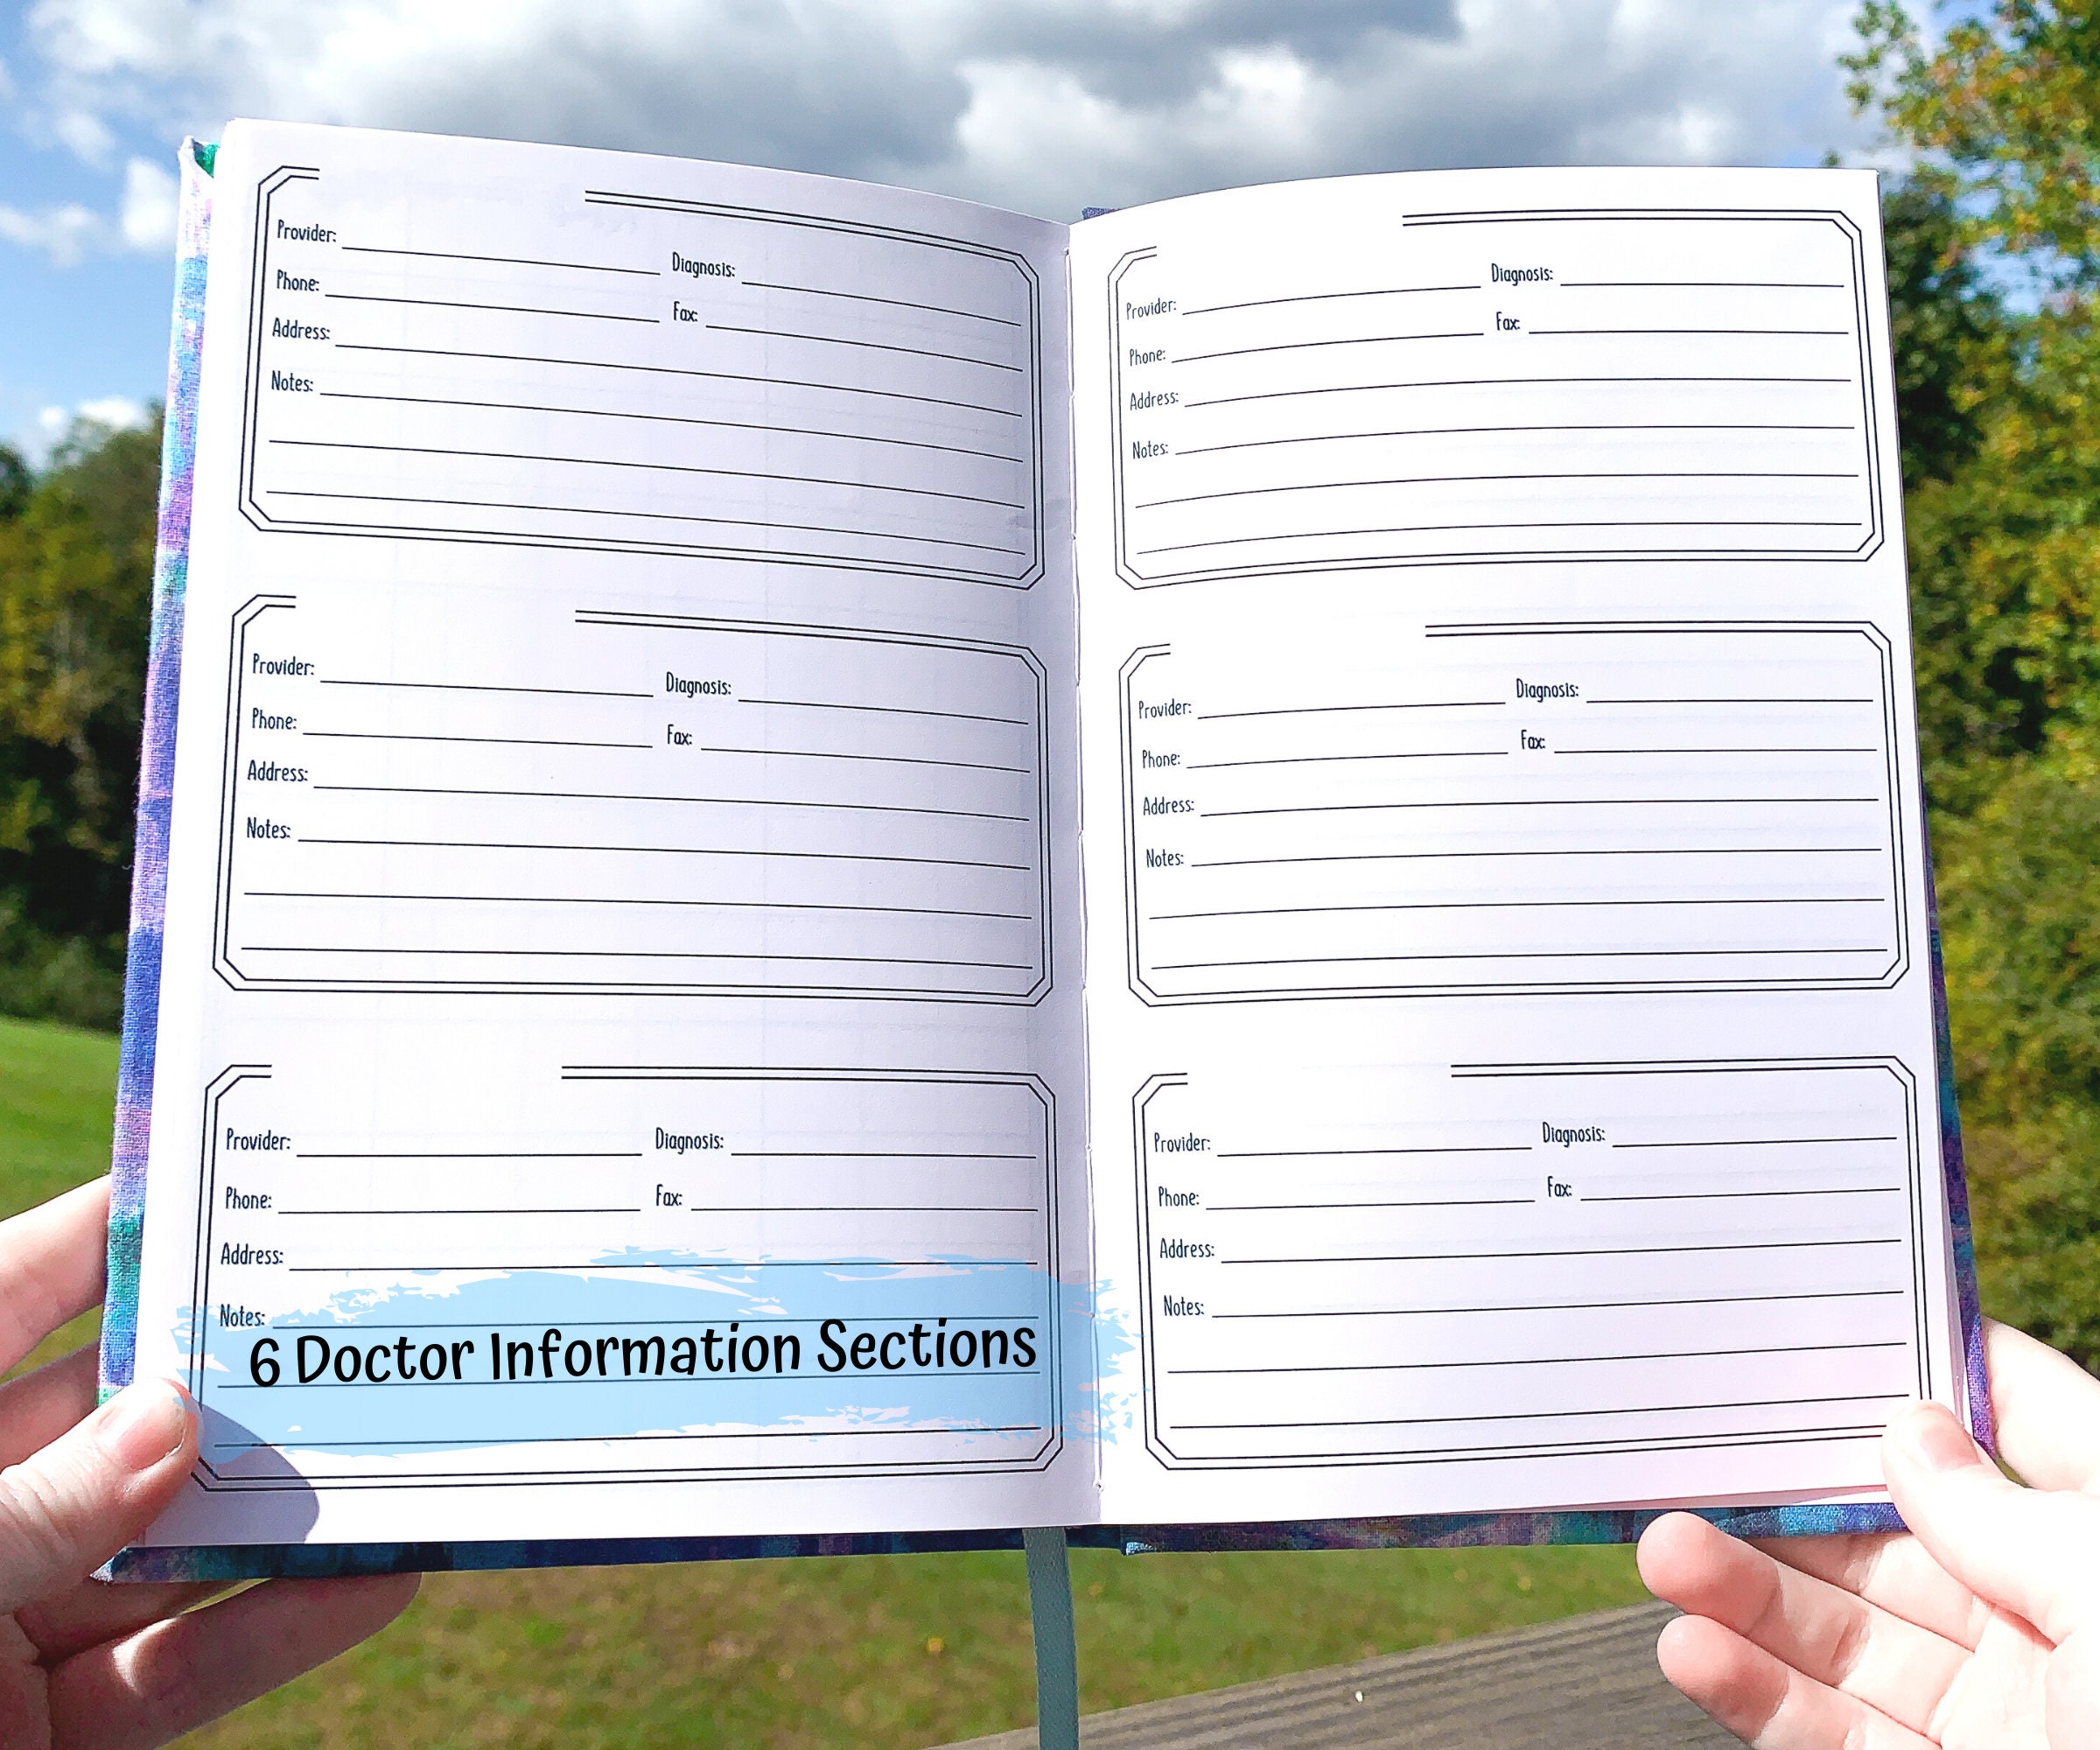 There are 6 boxes, 3 per page shown. A note say 6 Doctor Information Sections. Each box has writing lines for Provider, Diagnosis, Phone, Fax, Address, and 3 lines for notes.